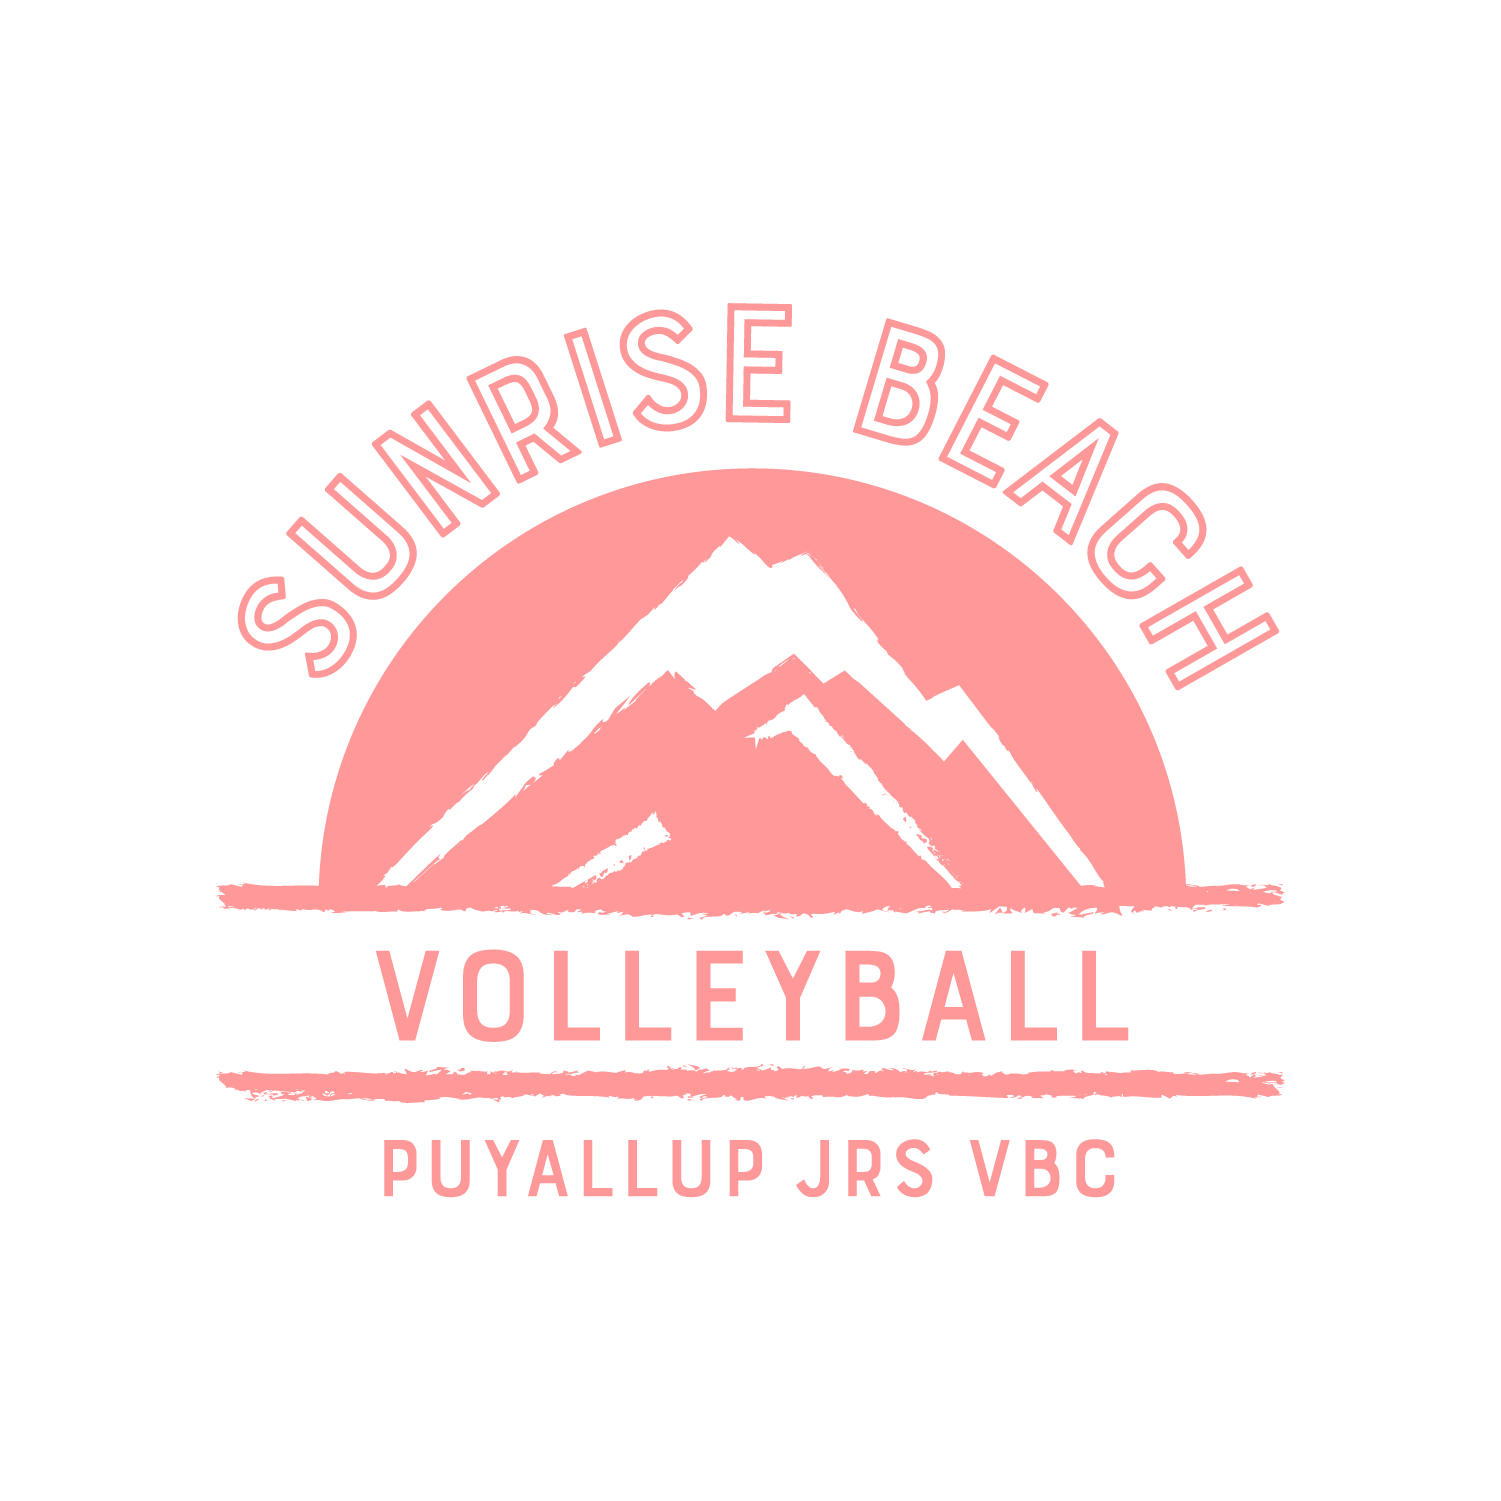 Puyallup Juniors Volleyball Club